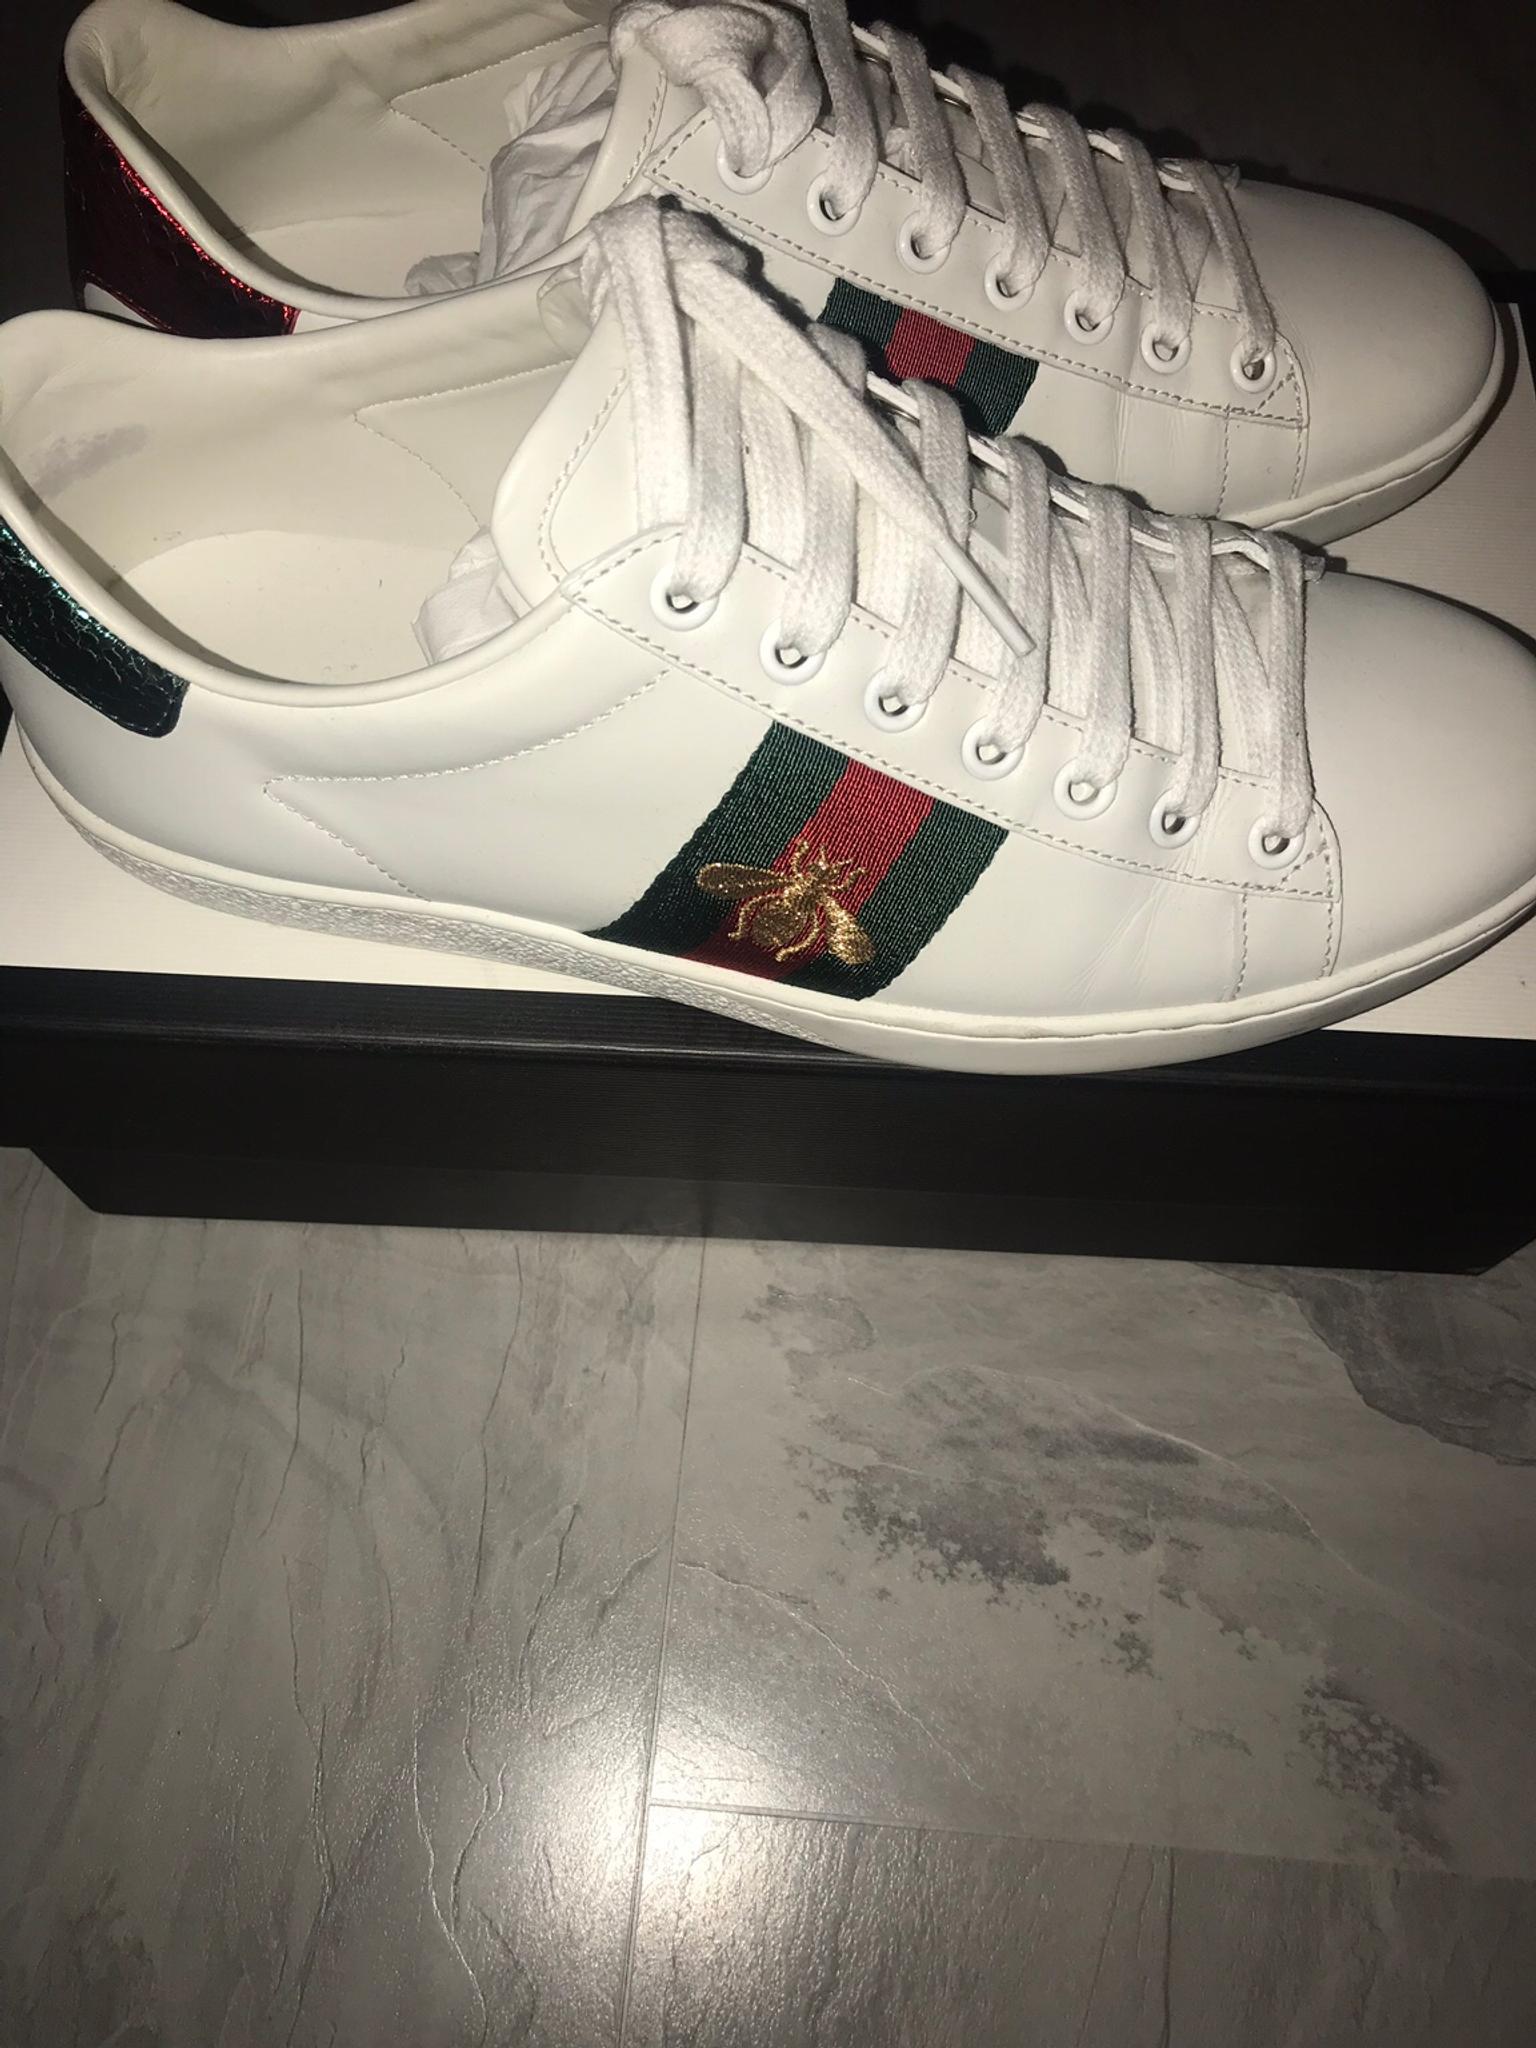 gucci ace bee sneakers price